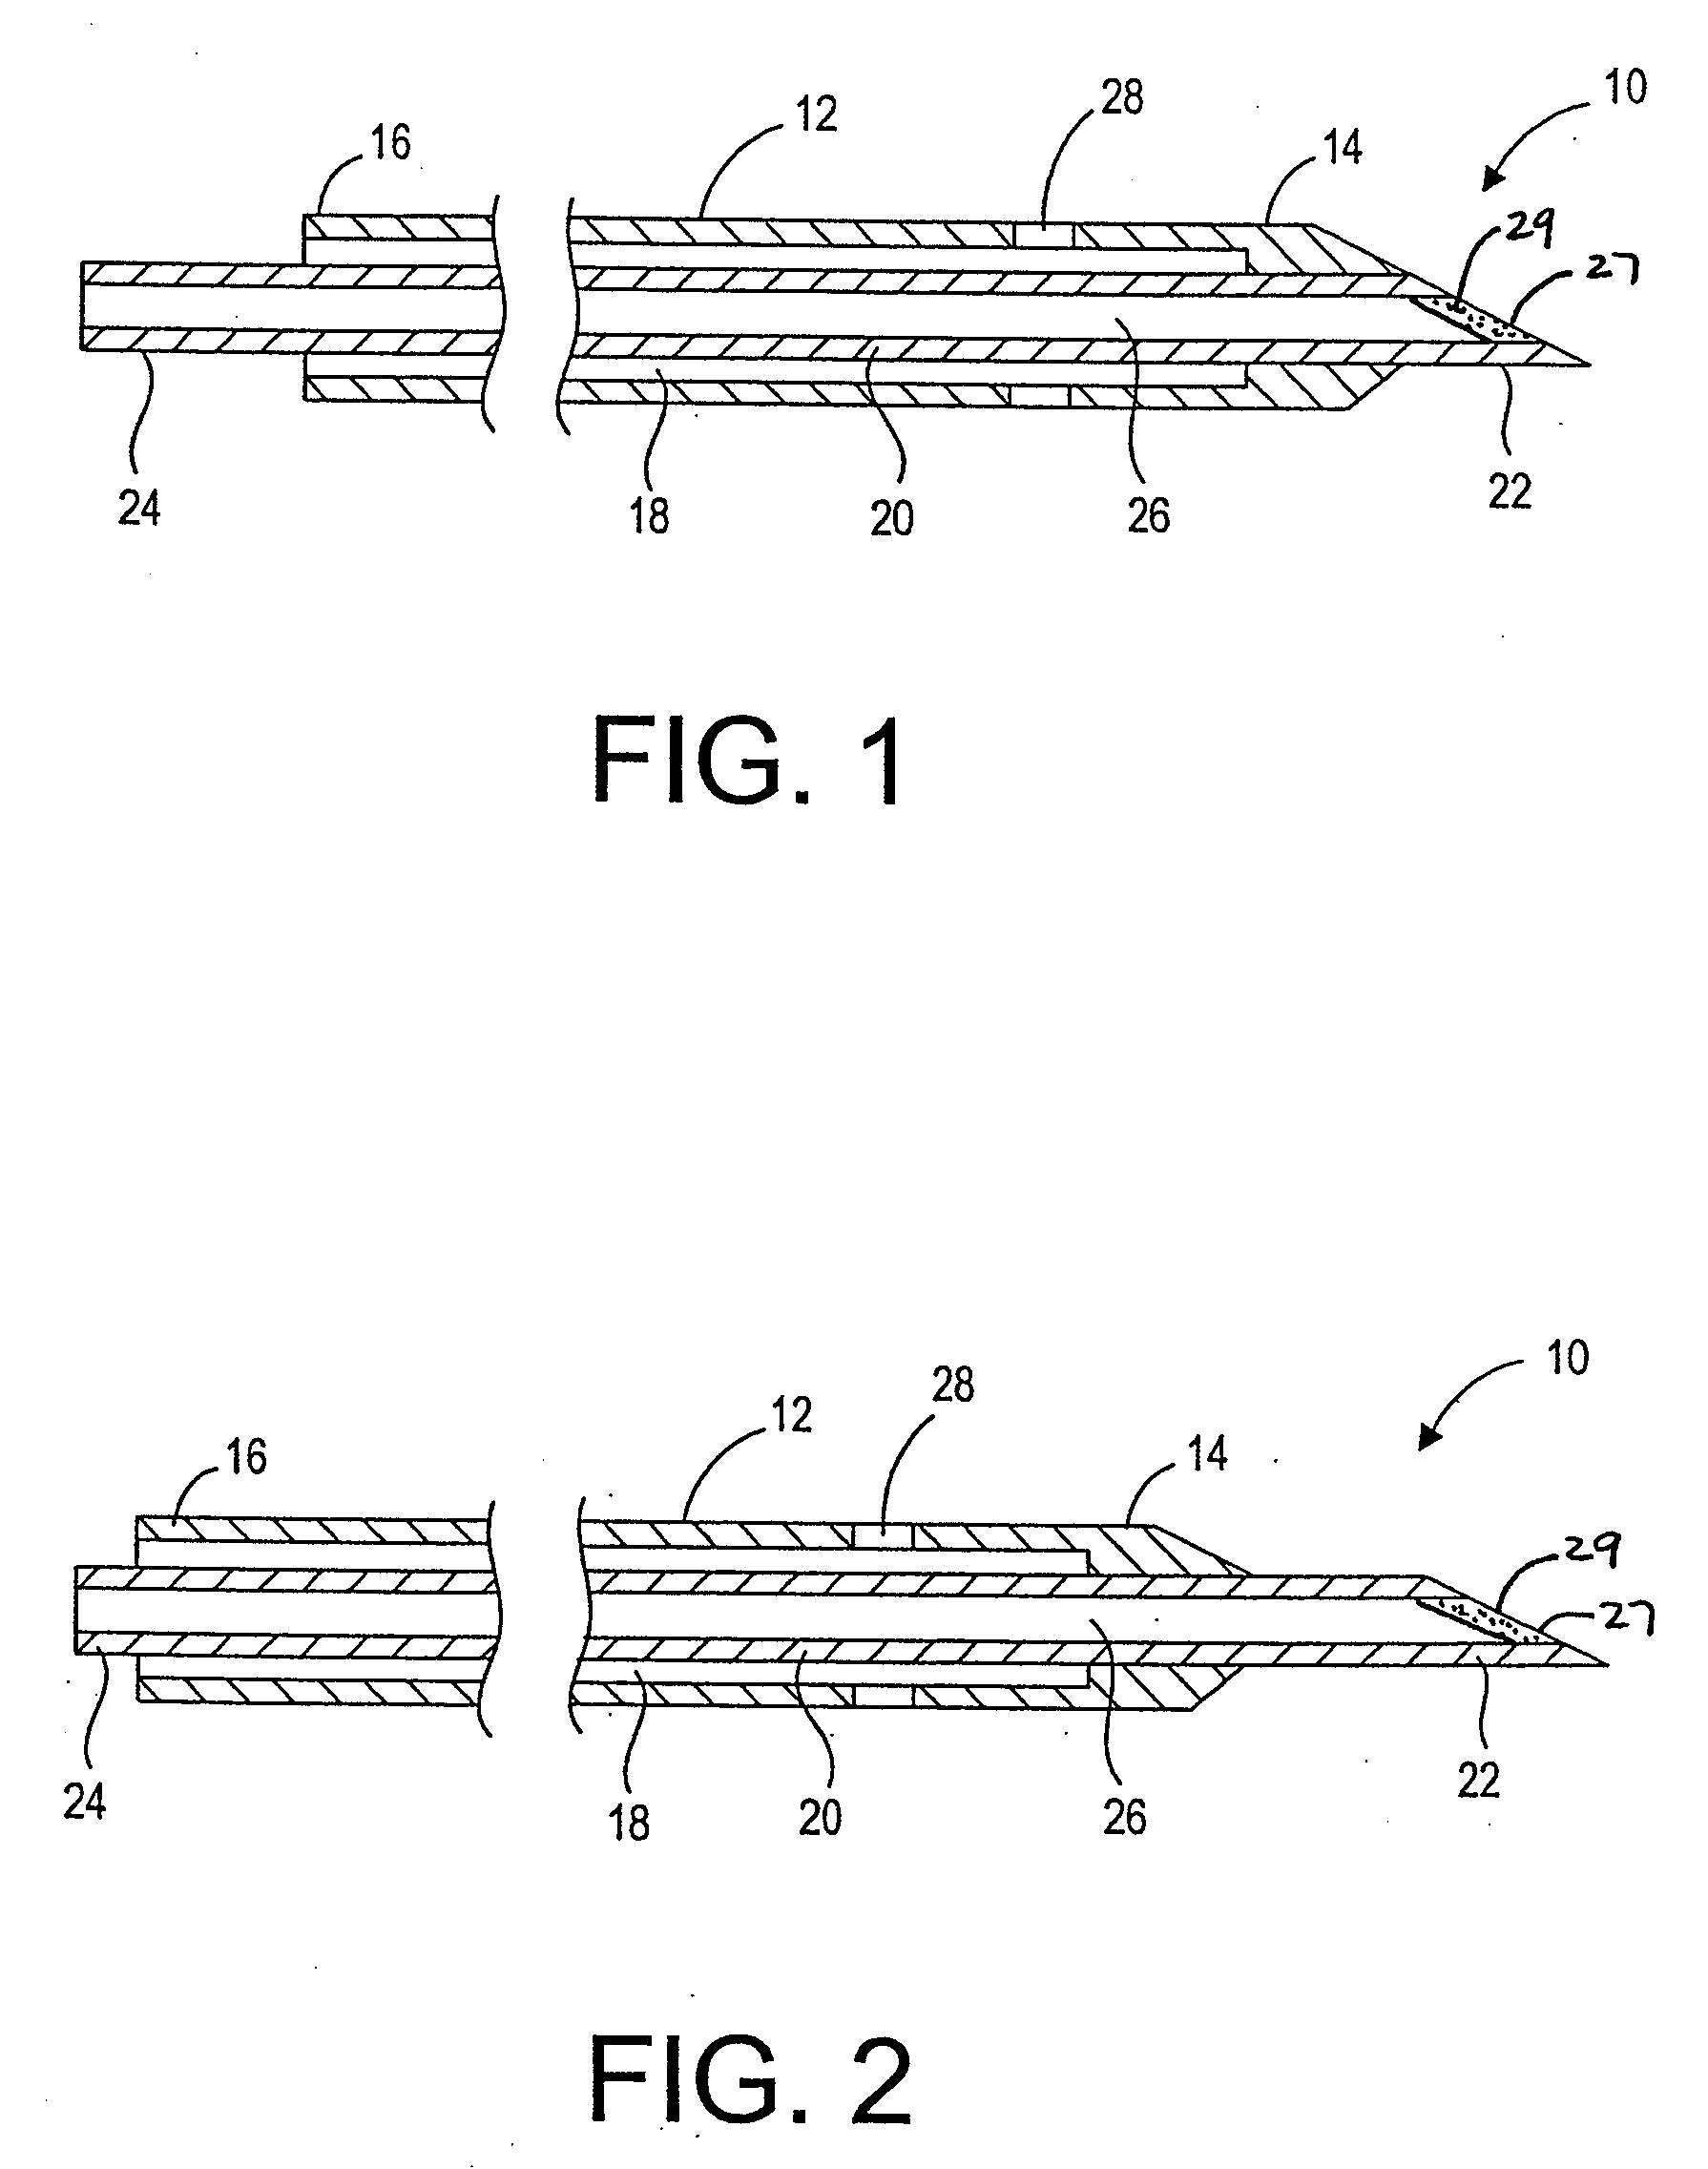 Method for delivering therapeutic or diagnostic agents